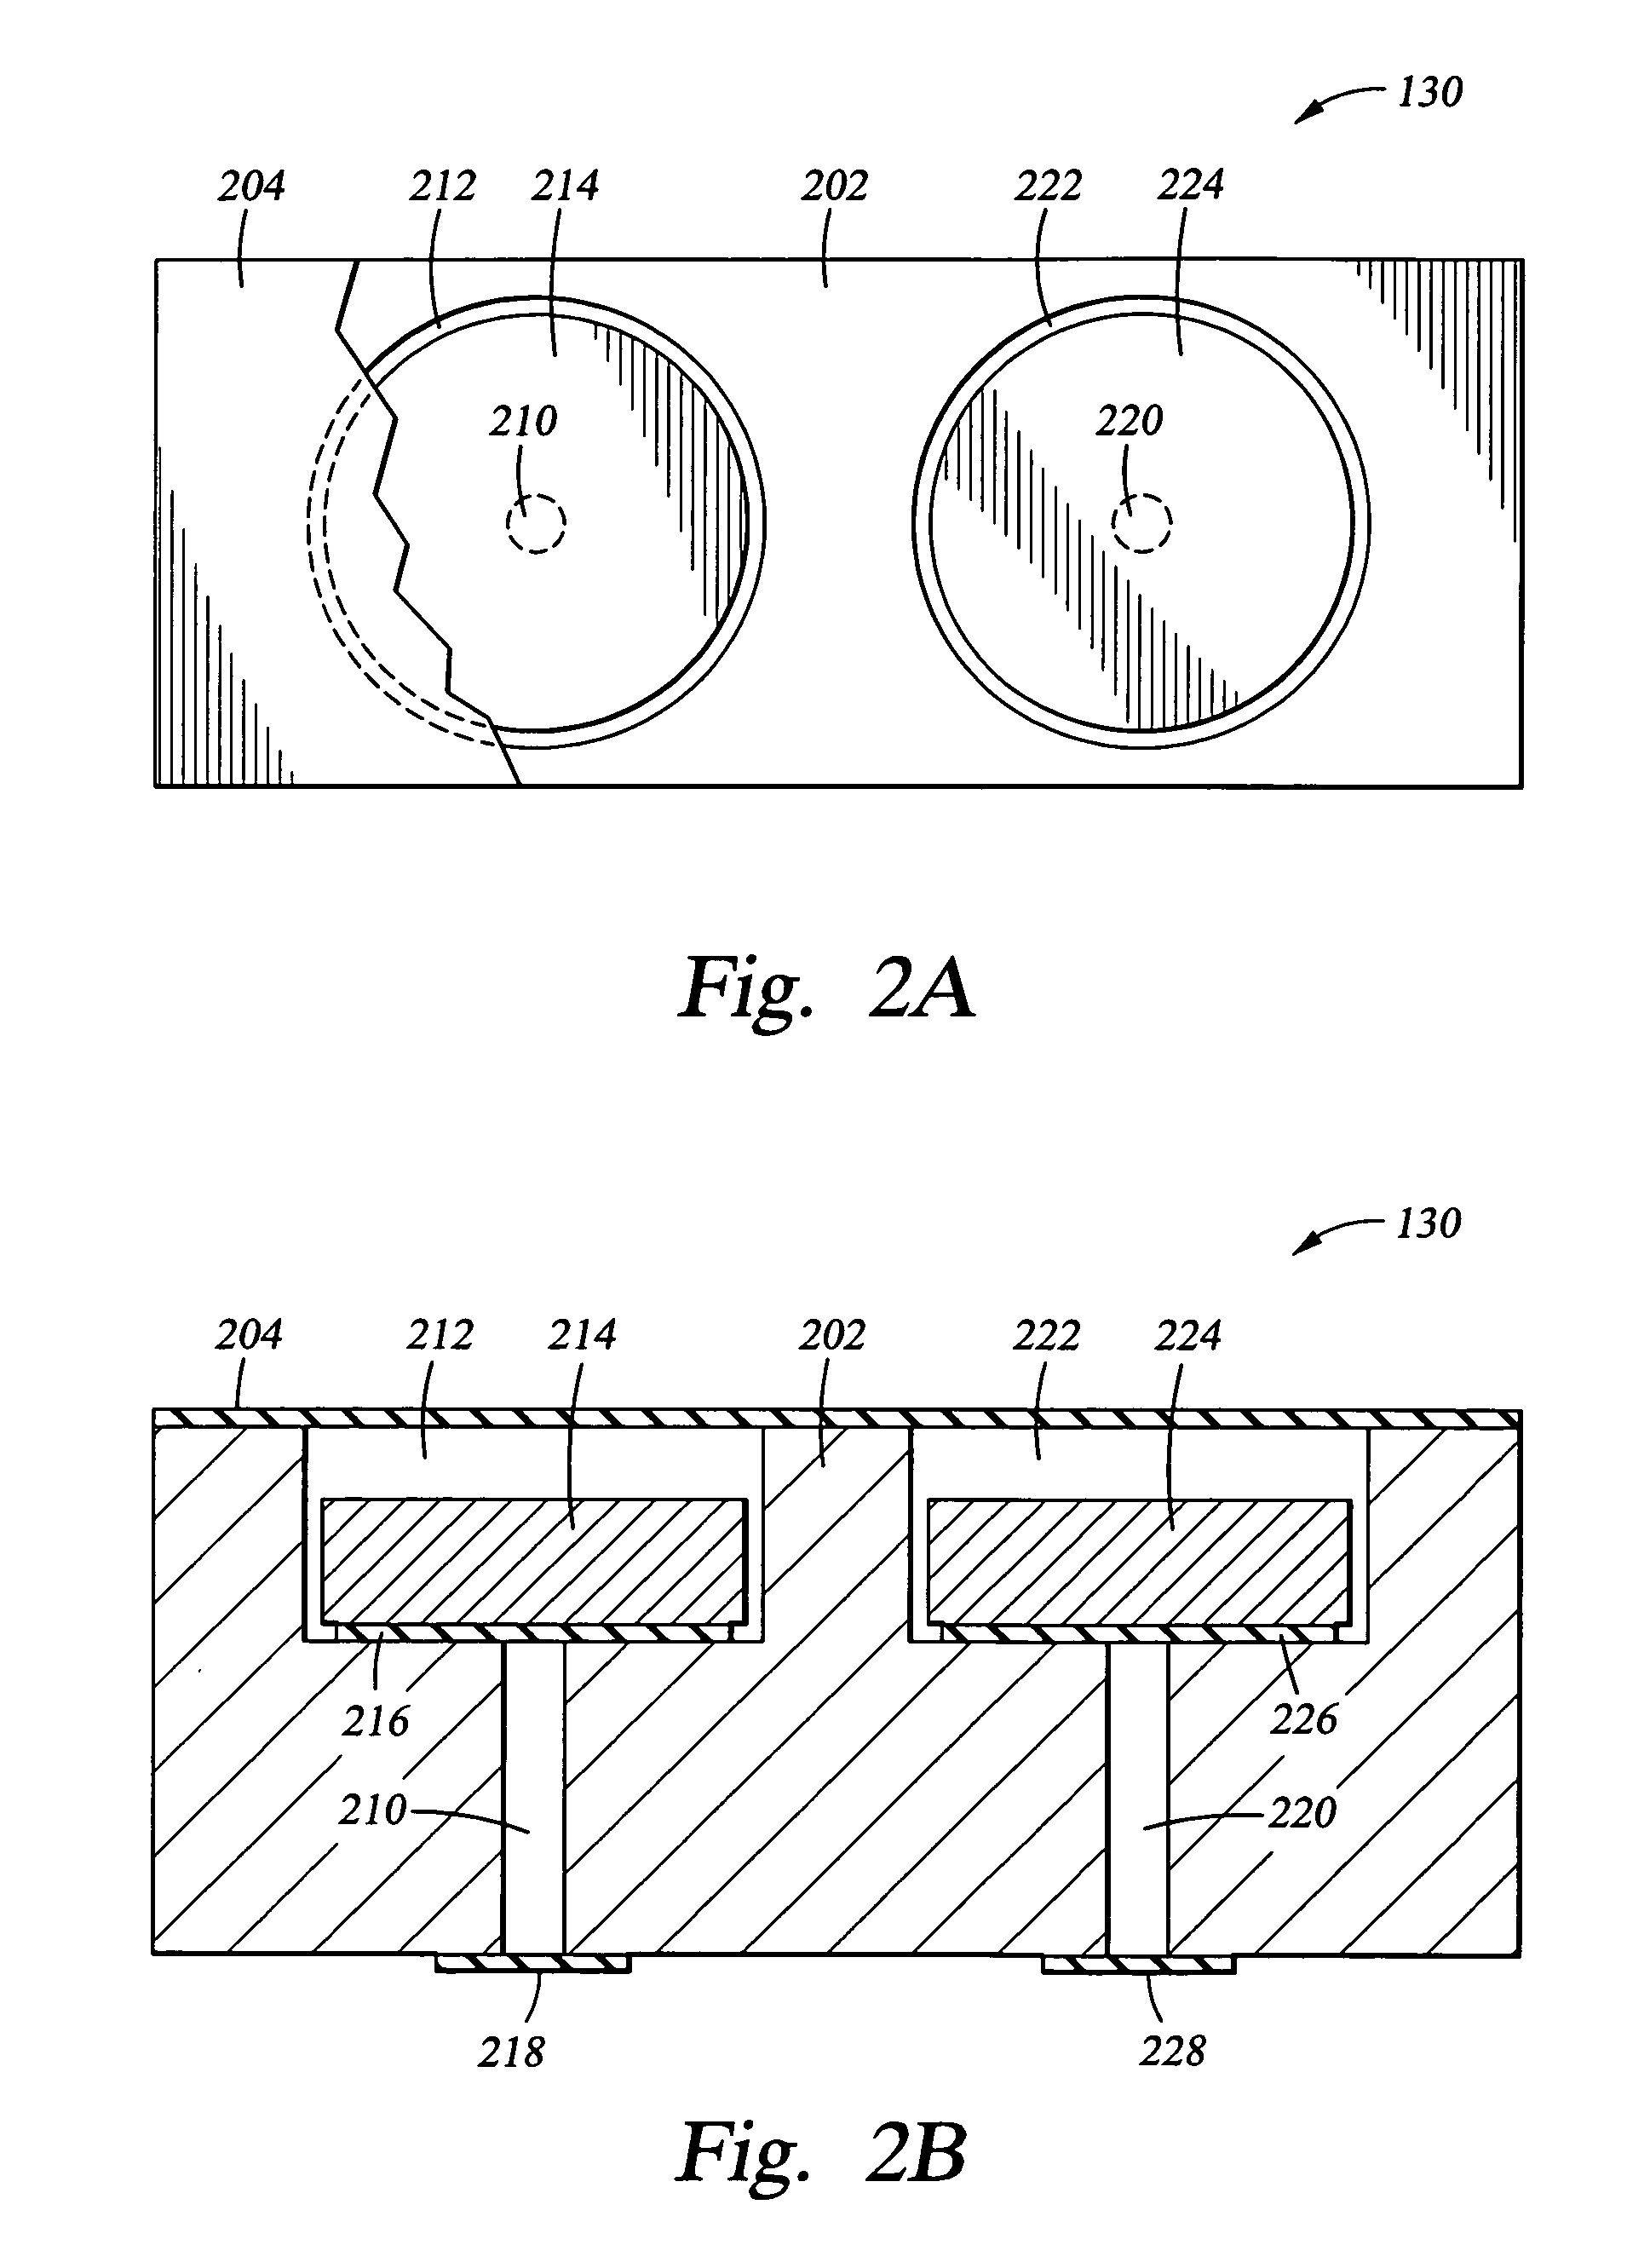 Control system to regulate the concentration of vapor in a hard disk drive